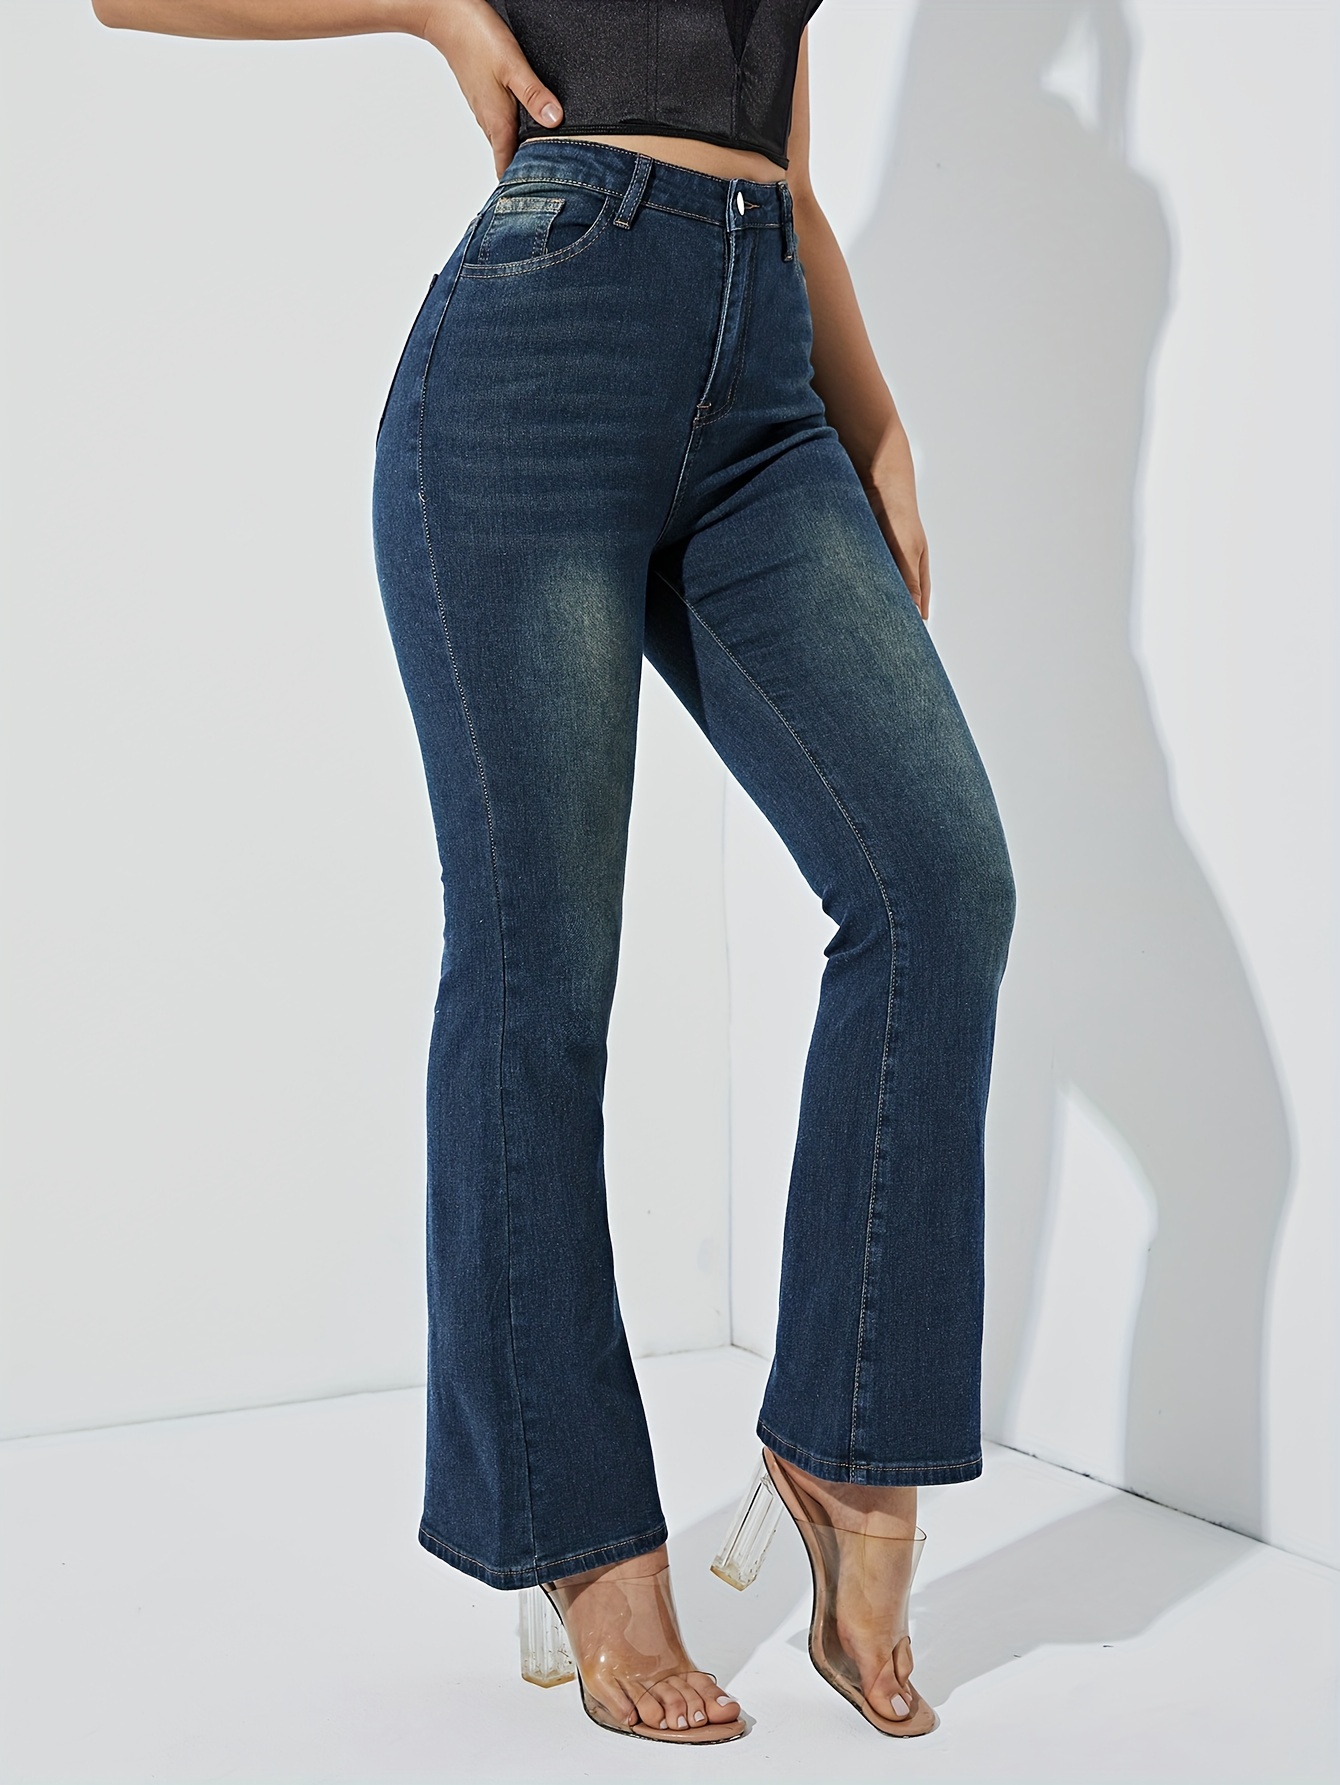 Plicated Pattern Bootcut Jeans, Star & Stripe Printed Patched Pocket Back  Casual Denim Pants, Women's Denim Jeans & Clothing